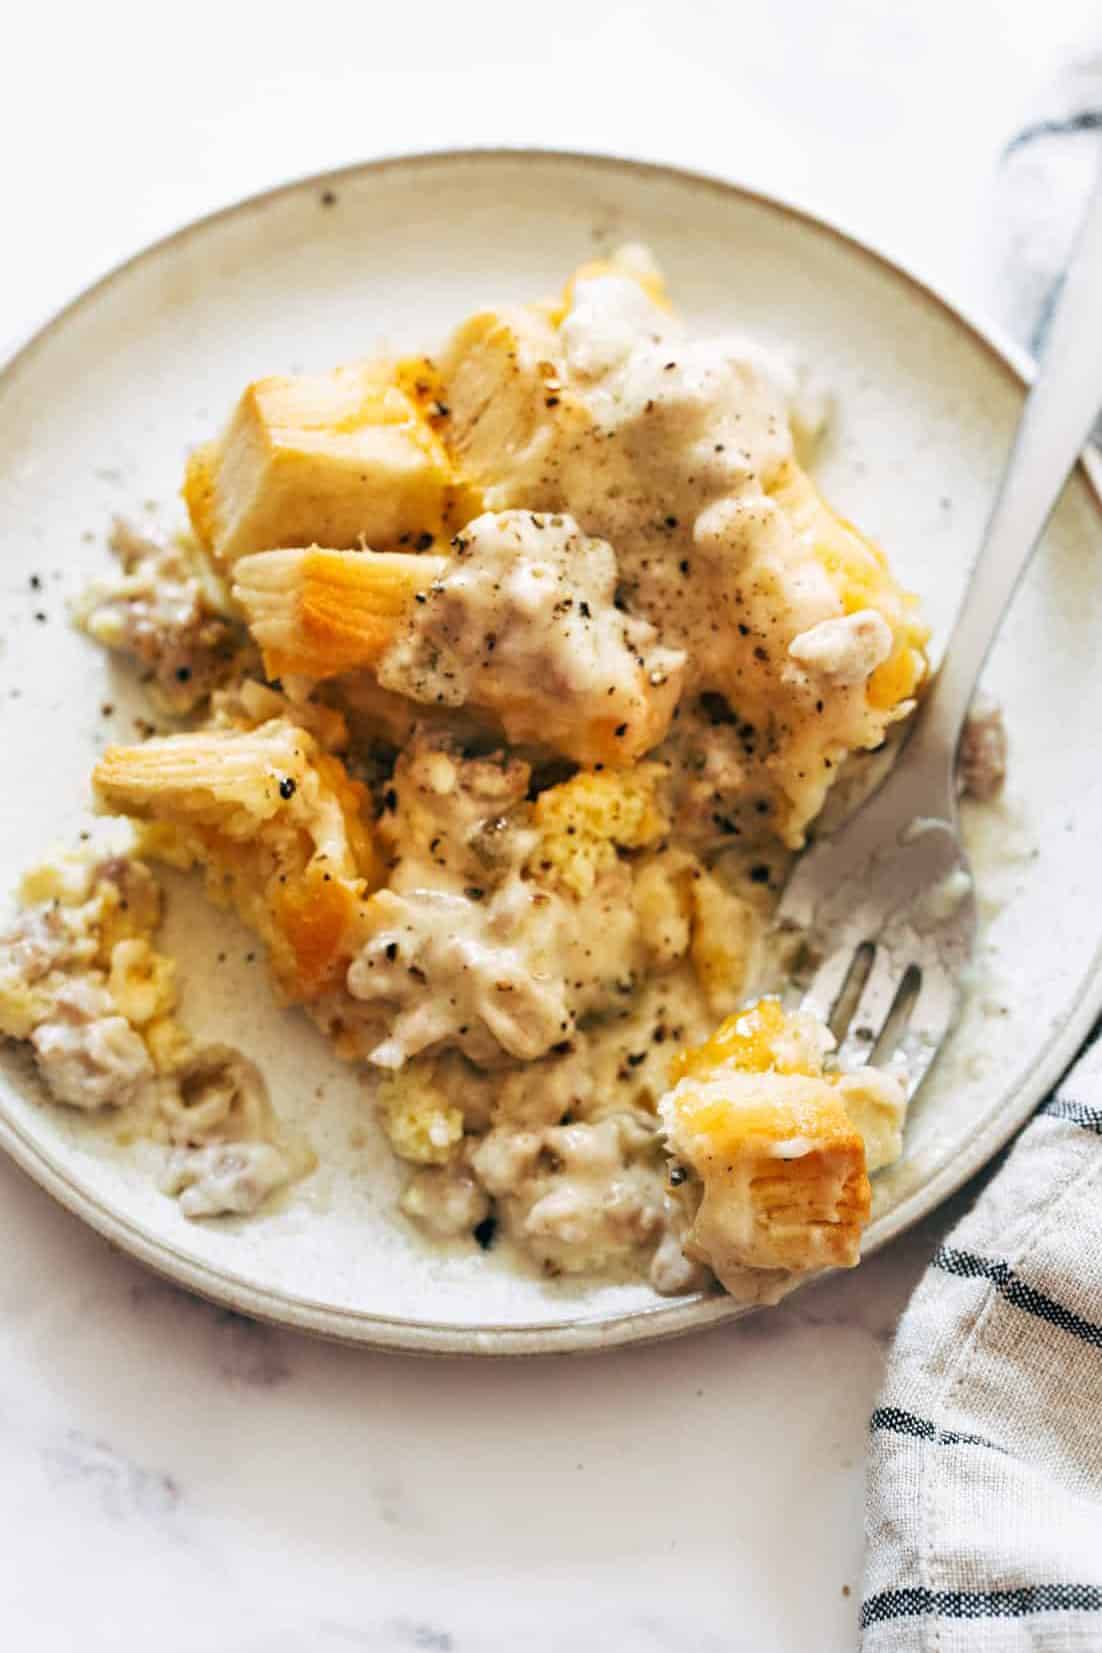 https://pinchofyum.com/wp-content/uploads/ALDI-Full-Size-Biscuits-and-Gravy-Egg-Bake-Featured.jpg